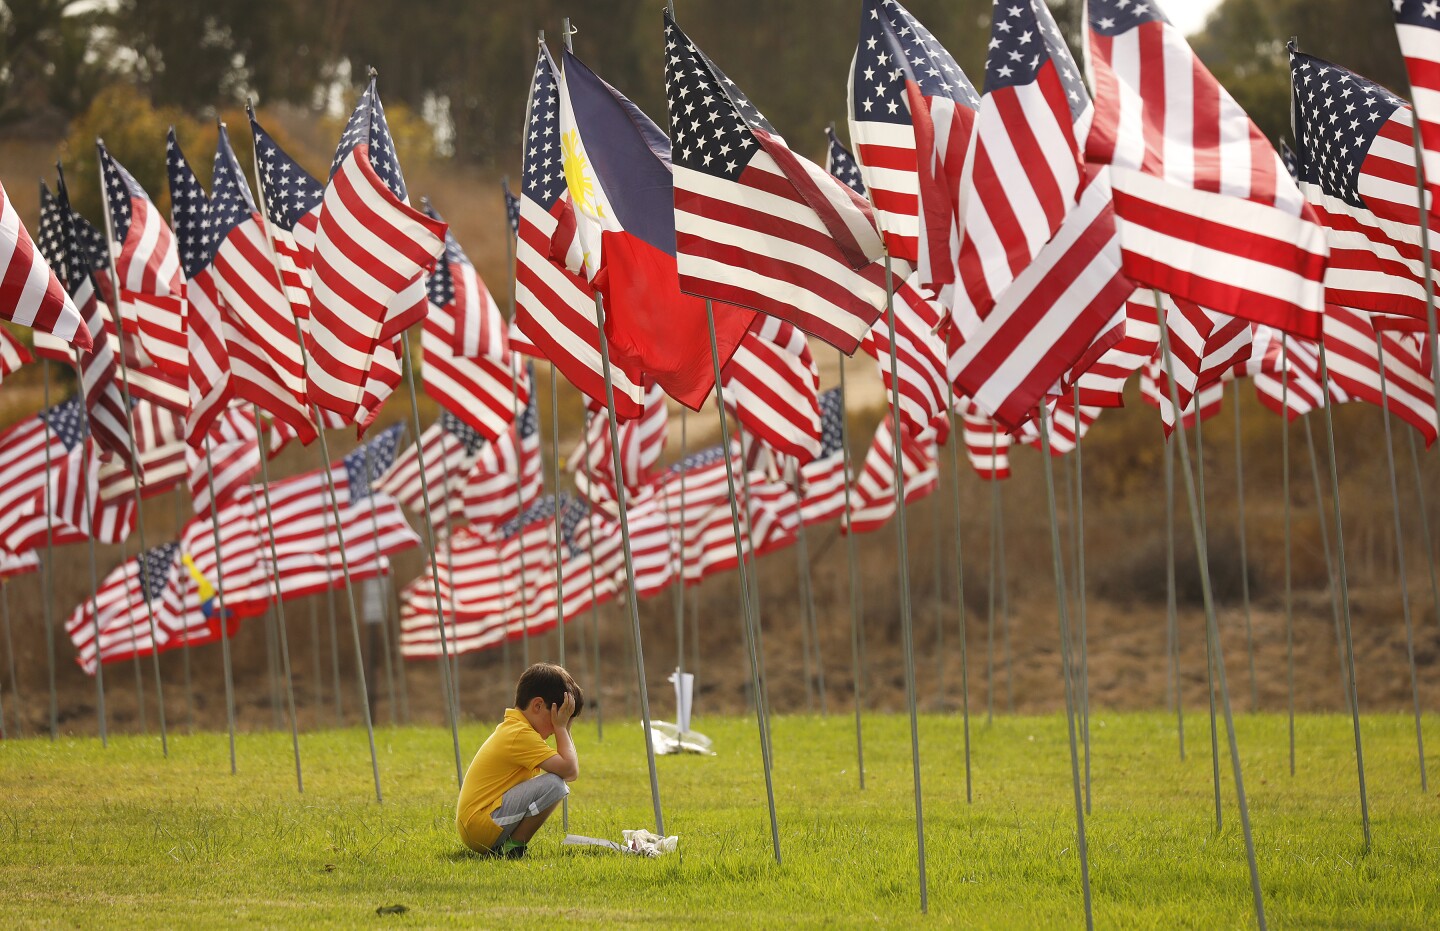 MALIBU, CA - SEPTEMBER 11, 2019 7-year-old Alex Pitz came with his Mother Heather to visit Pepperdine University’s annual Waves of Flags installation that commemorates the 2,977 lives lost in the 9/11 terror attacks. Heather who is originally from the East Coast has family members who saw the attacks first hand and wants here son to know about the history. This is the 12th consecutive installation and features a display of 2,887 American flags for each American life lost and 90 international flags representing the home countries of those from abroad. (Al Seib / Los Angeles Times)